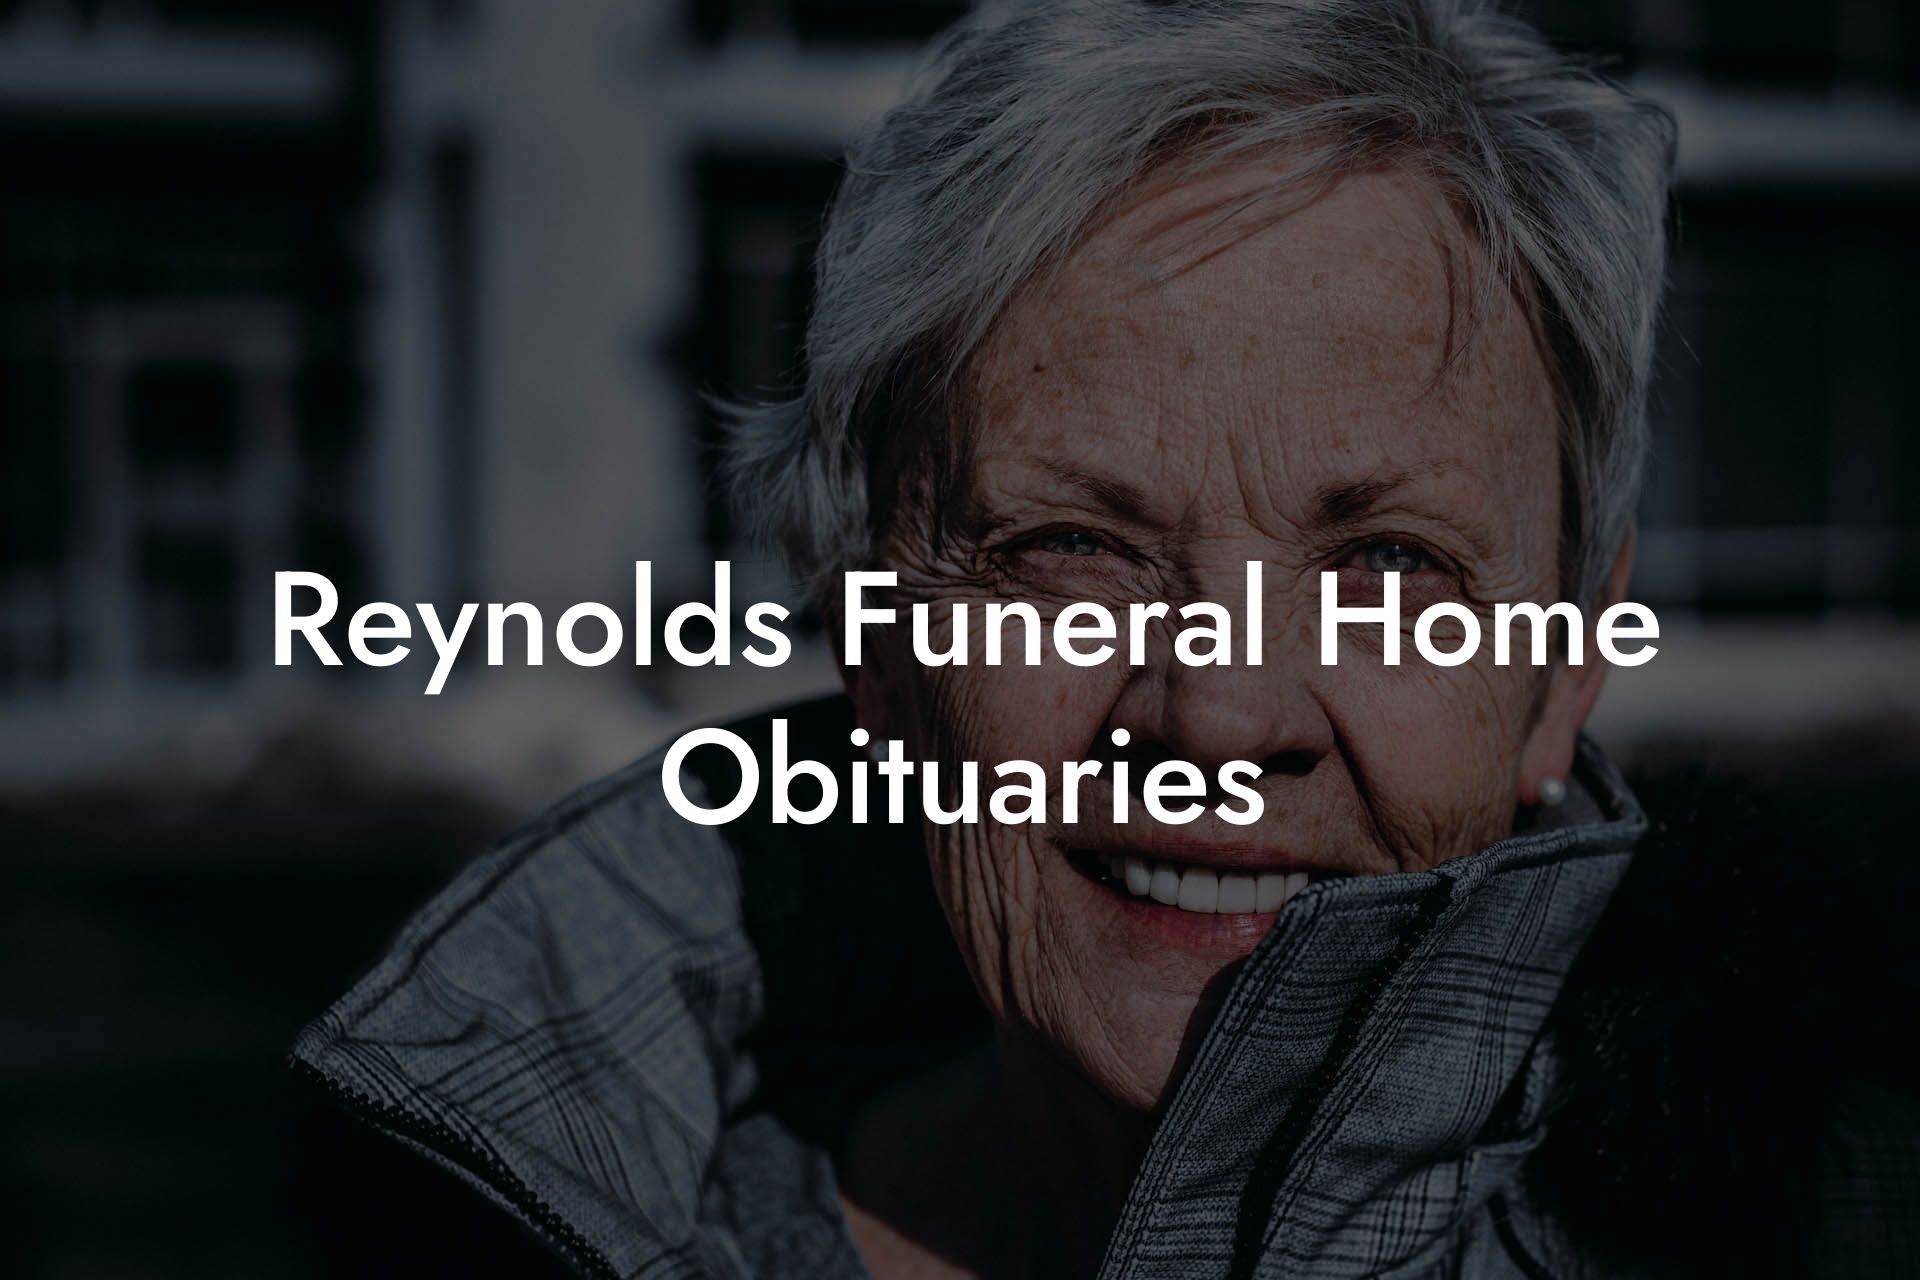 Reynolds Funeral Home Obituaries